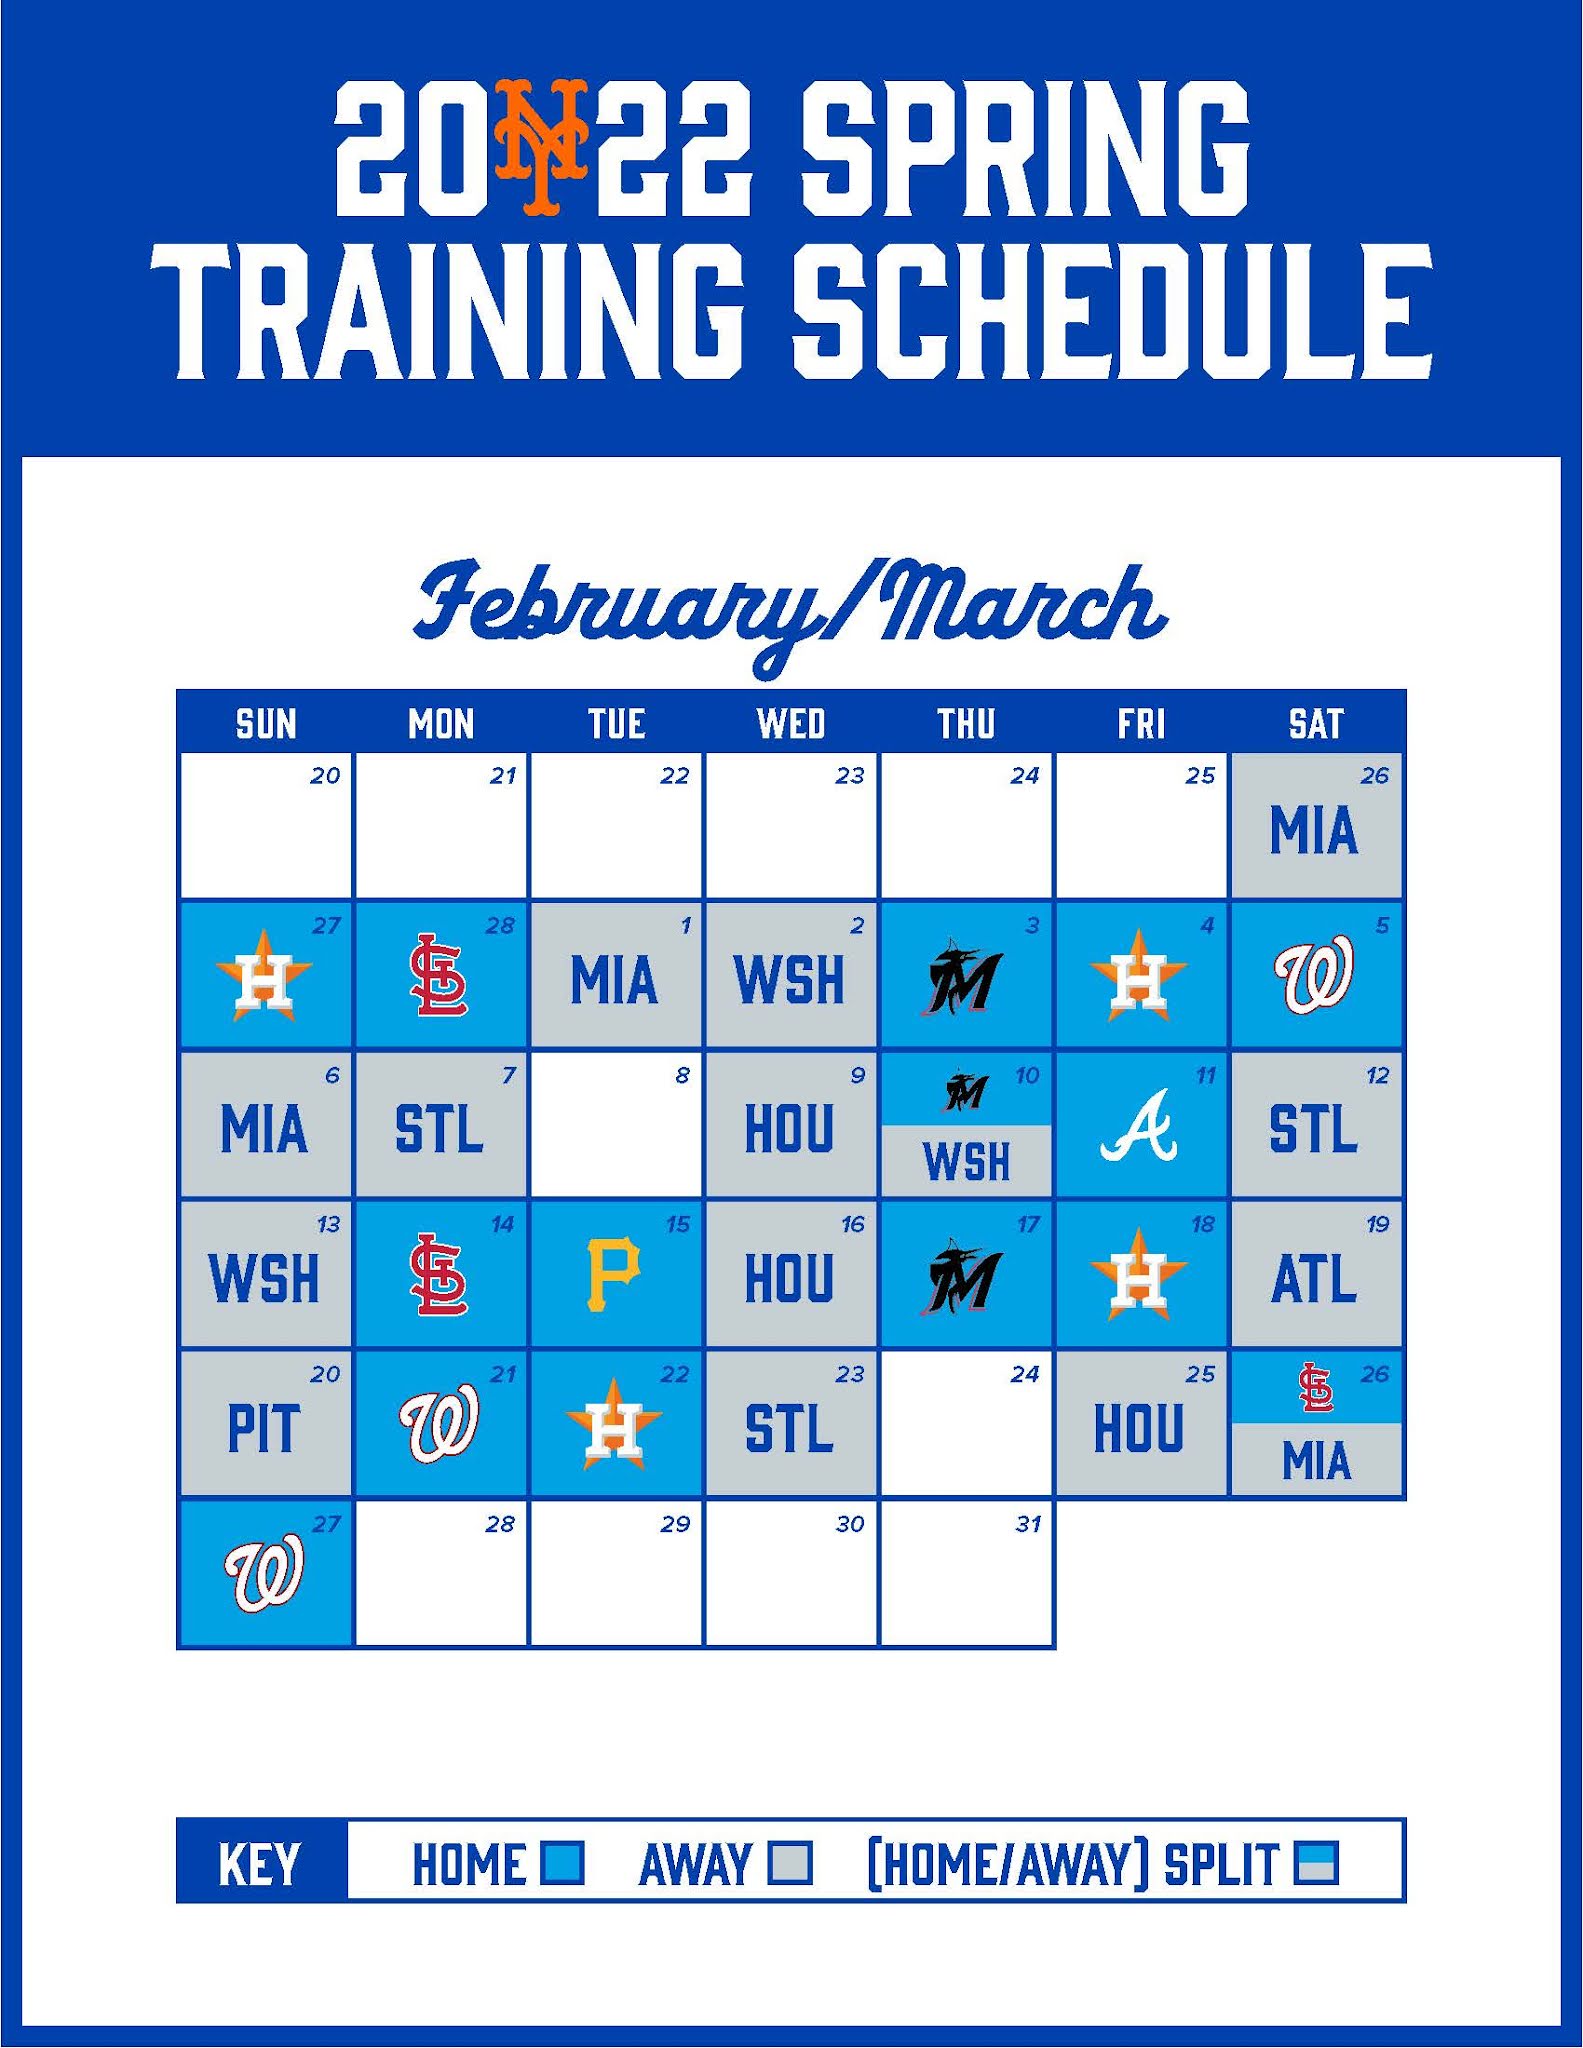 Mets announce key Spring Training dates